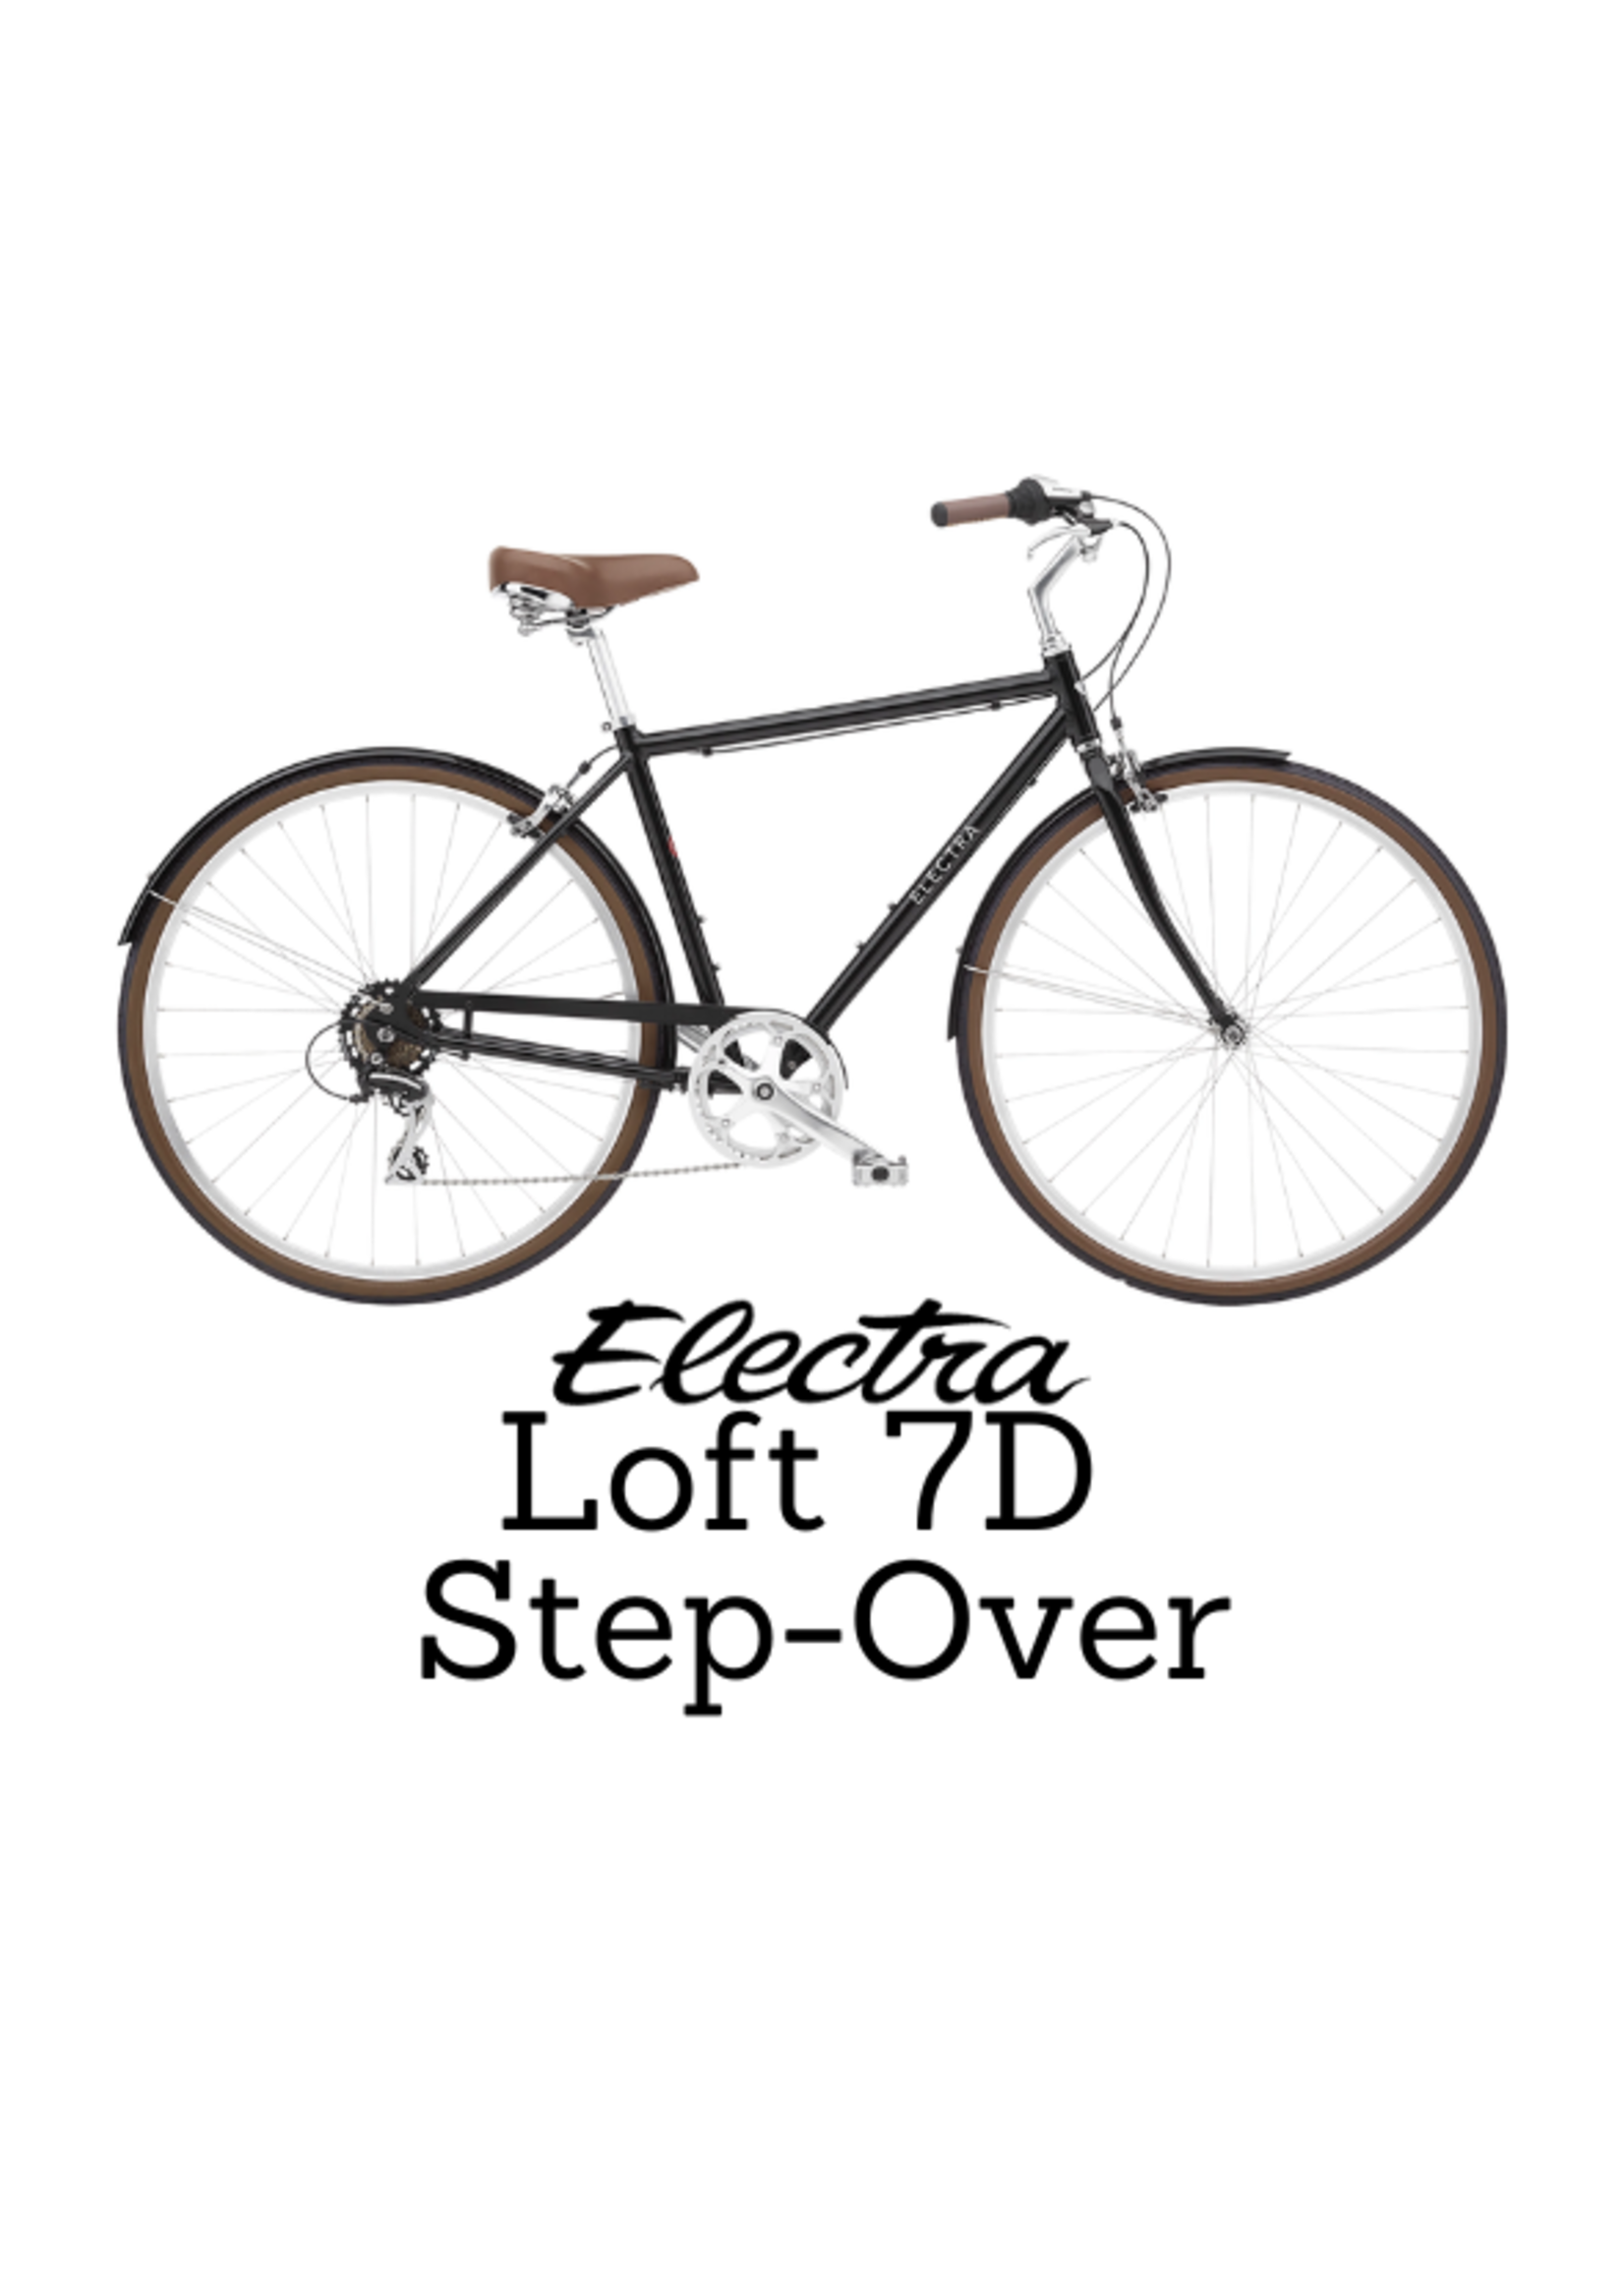 Electra Bicycle Company Electra Loft 7D Step-Over